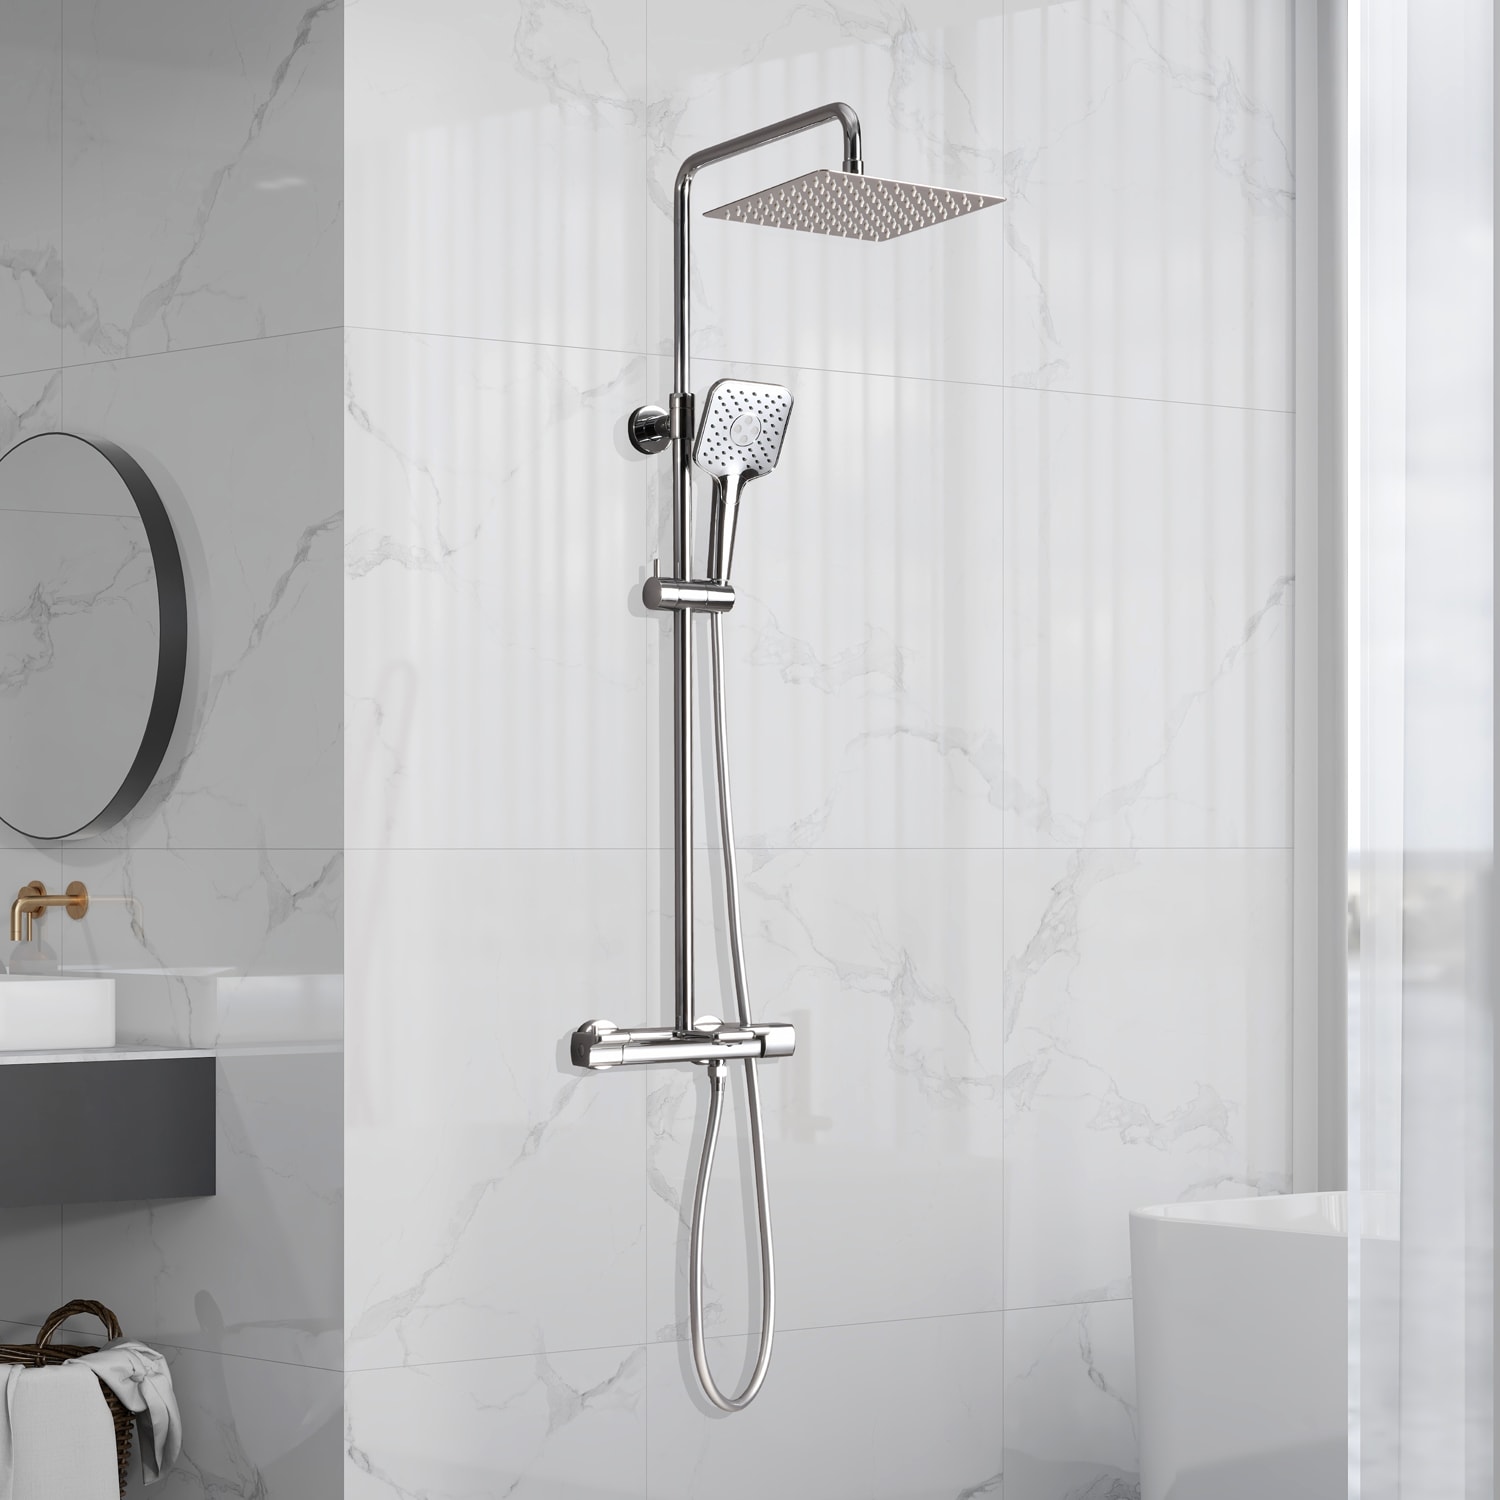 Pouuin Ob Chrome Waterfall Shower Faucet Bar System with 4-way Diverter Valve Included